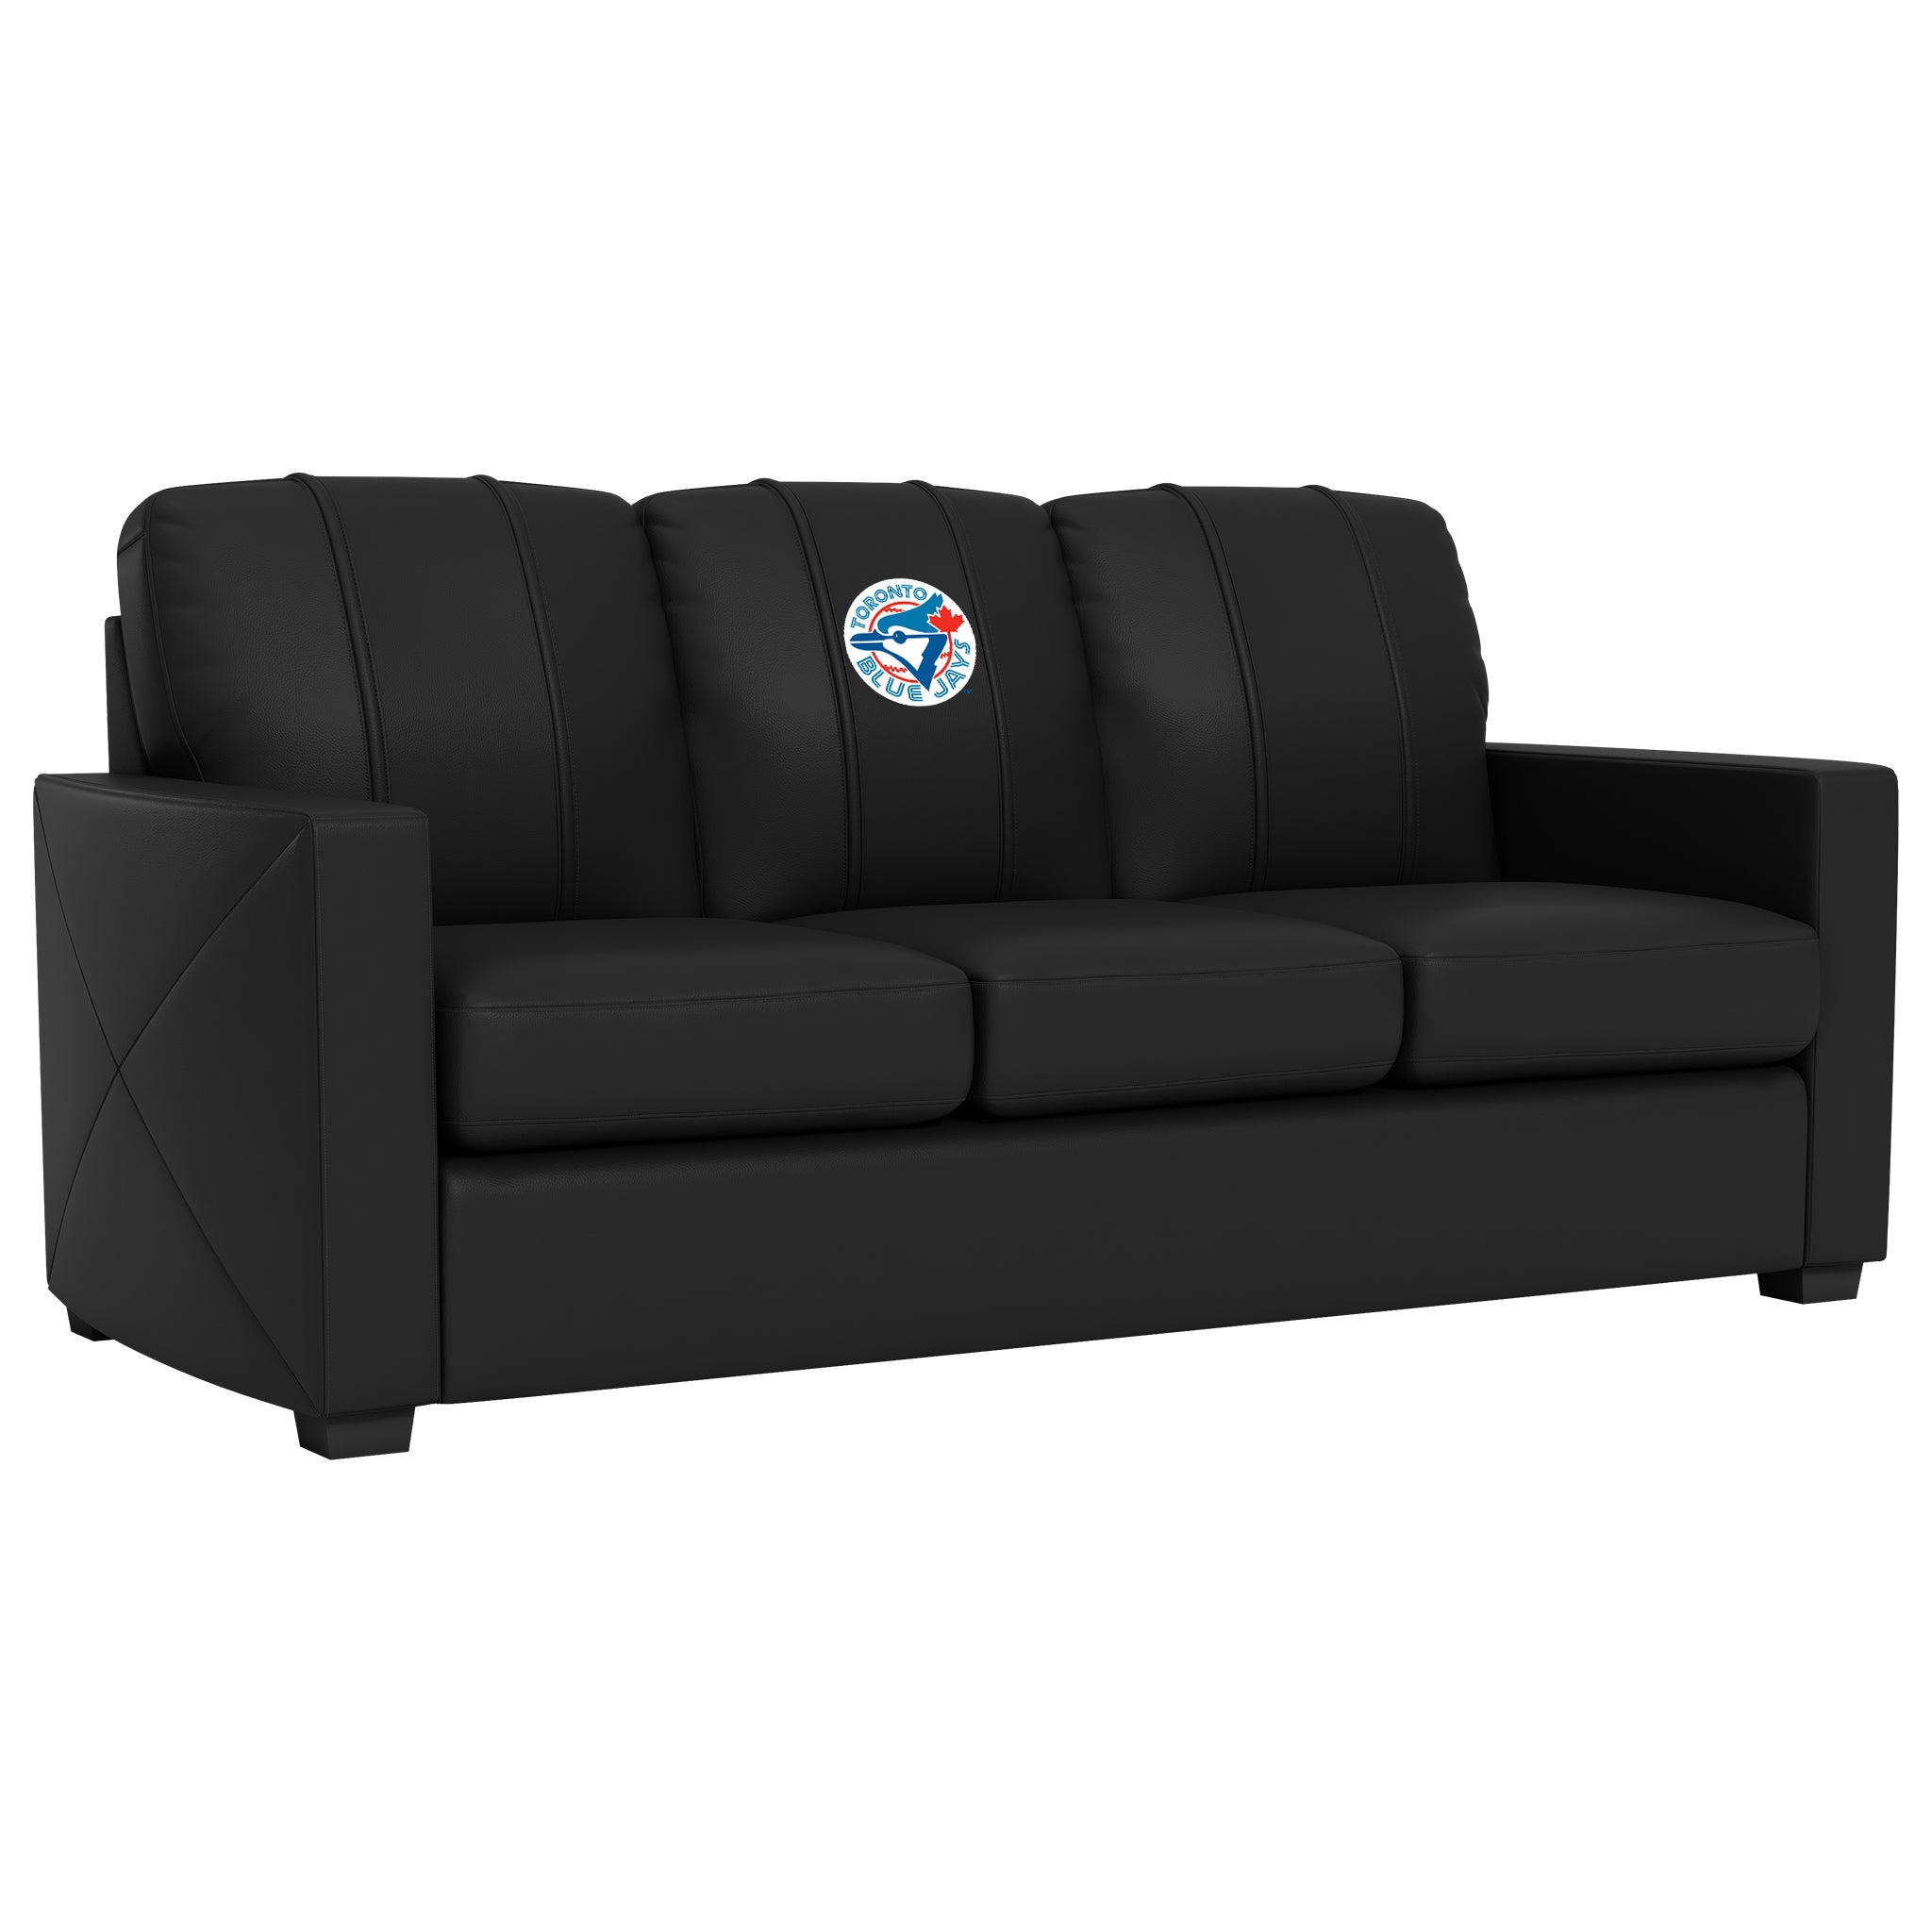 Silver Sofa with Toronto Blue Jays Cooperstown